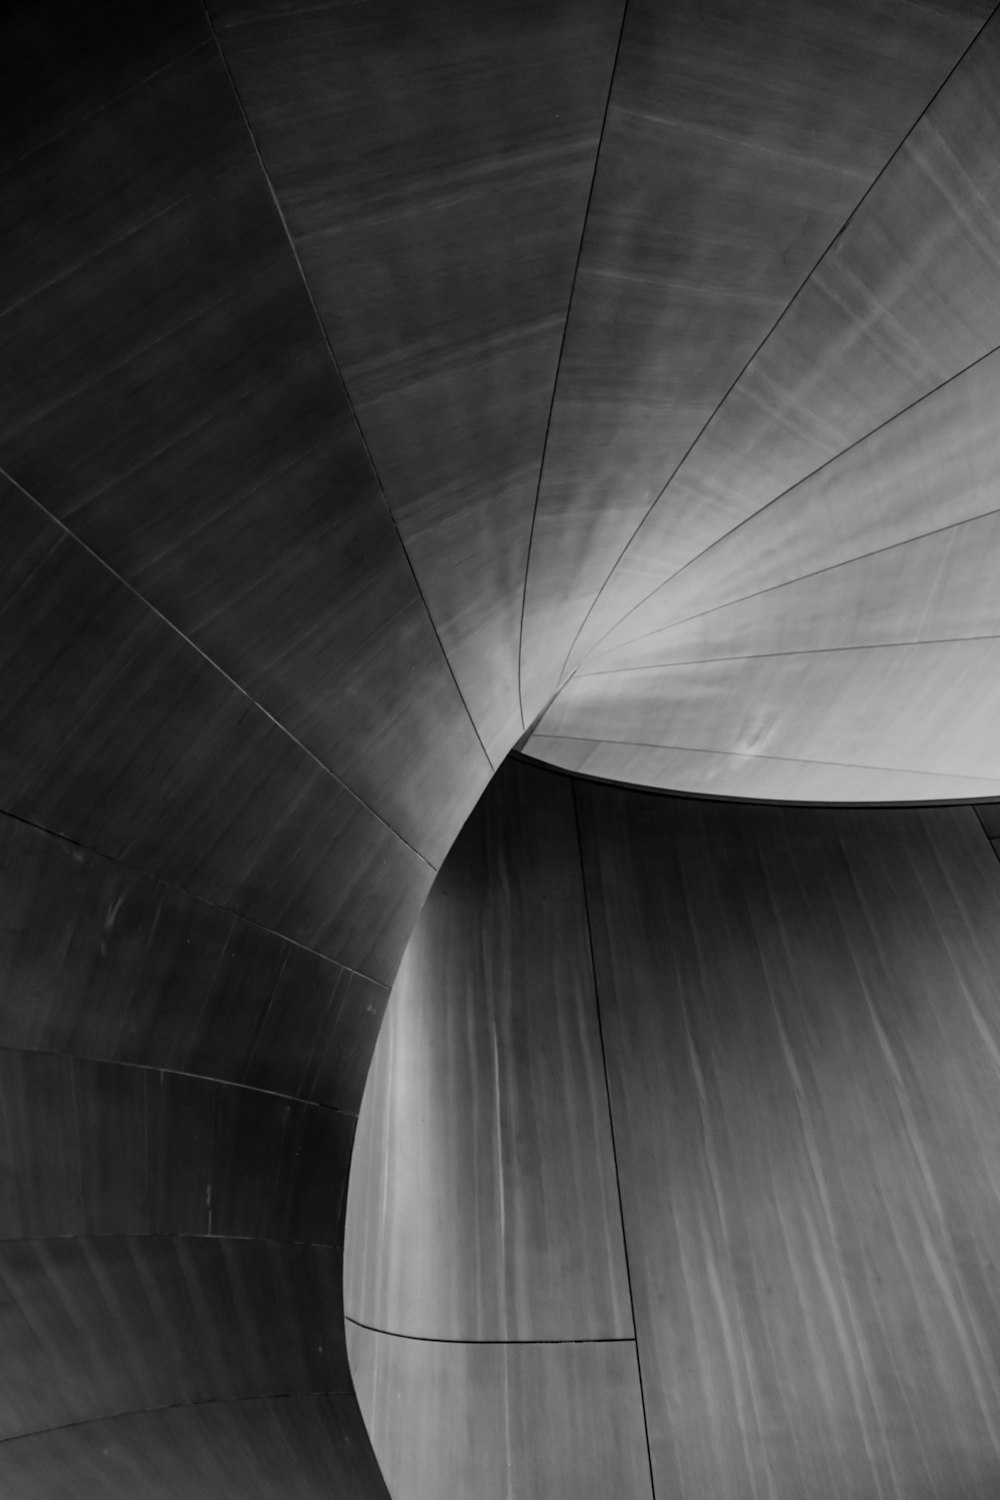 a black and white photo of a curved wall